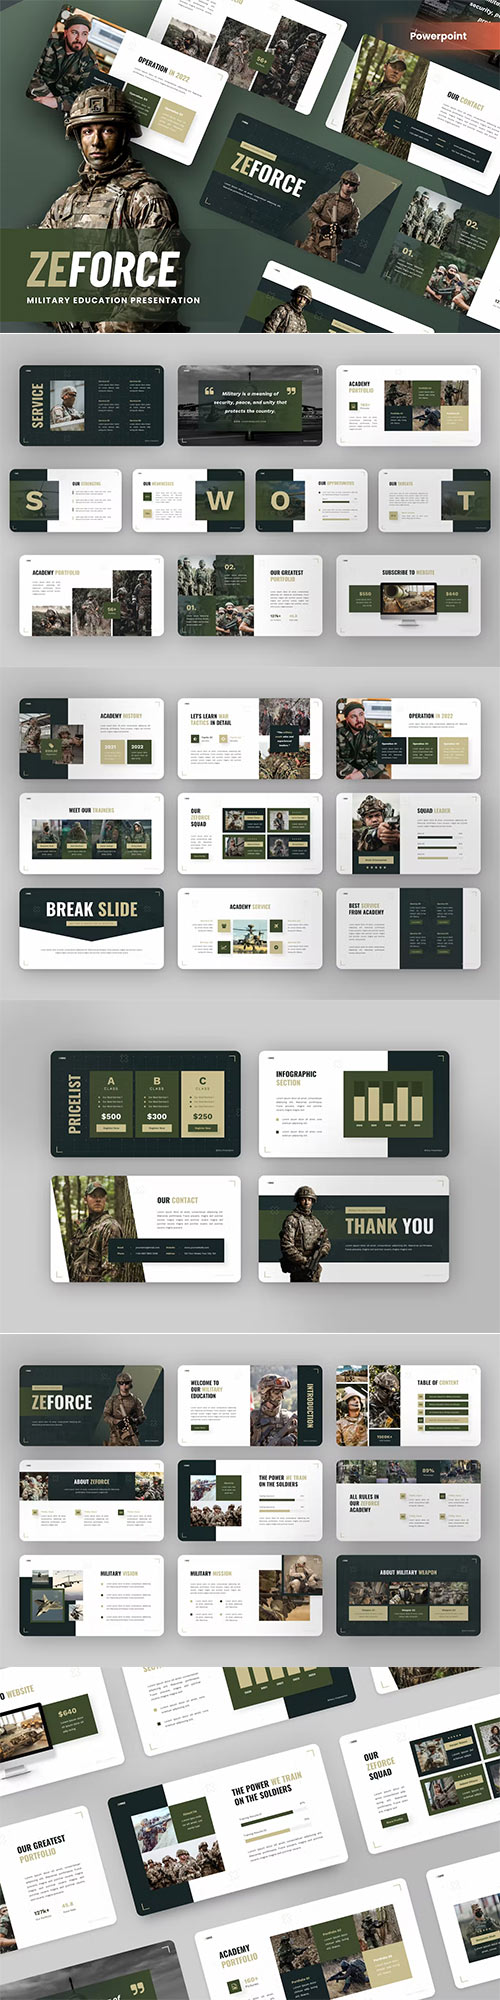 Zeforce - Military Education Powerpoint Template